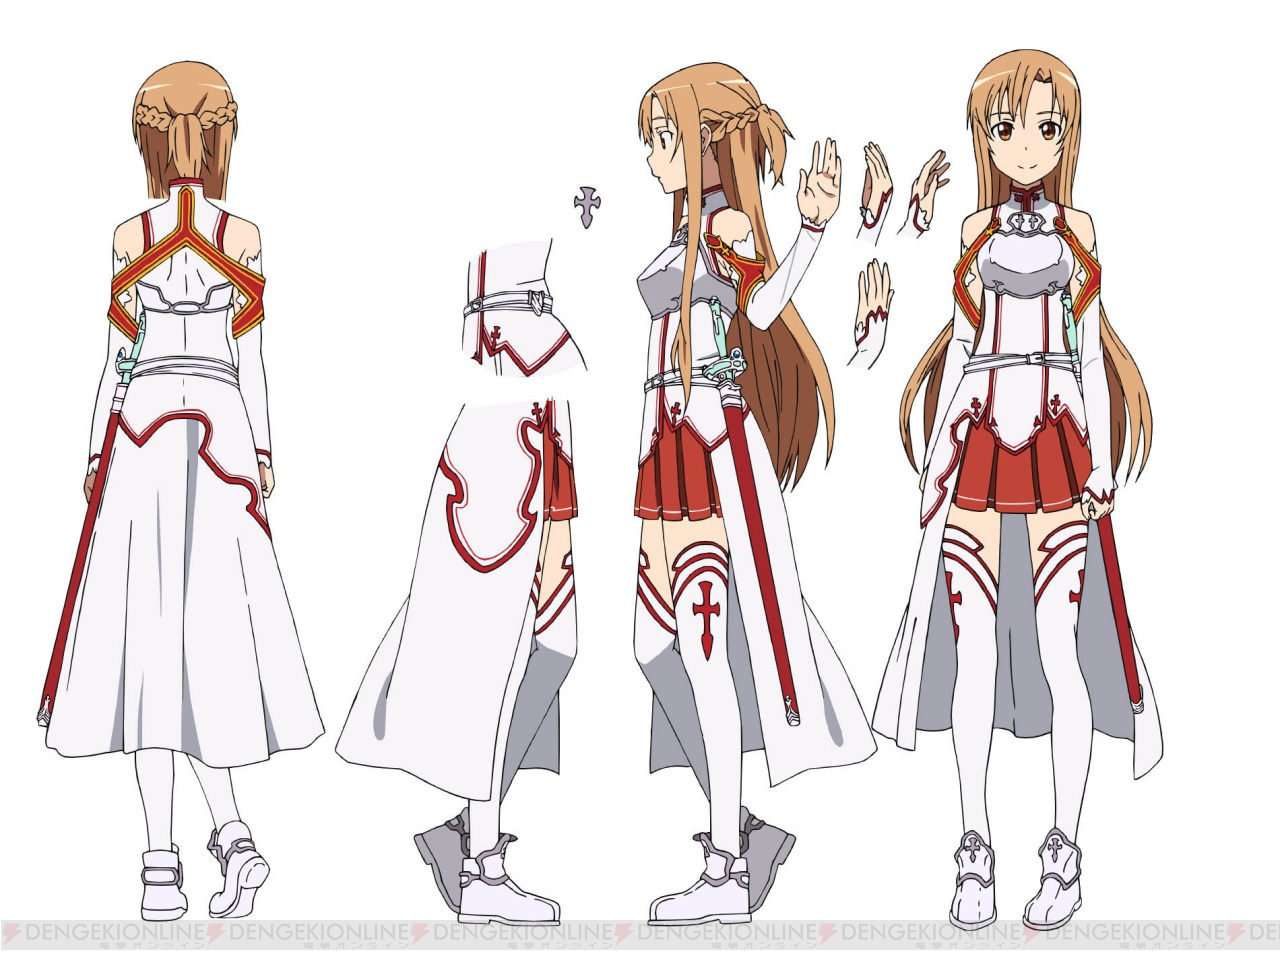 Asuna Yuuki, from Sword Art Online: Aincrad Arc, a roleplay on RPG